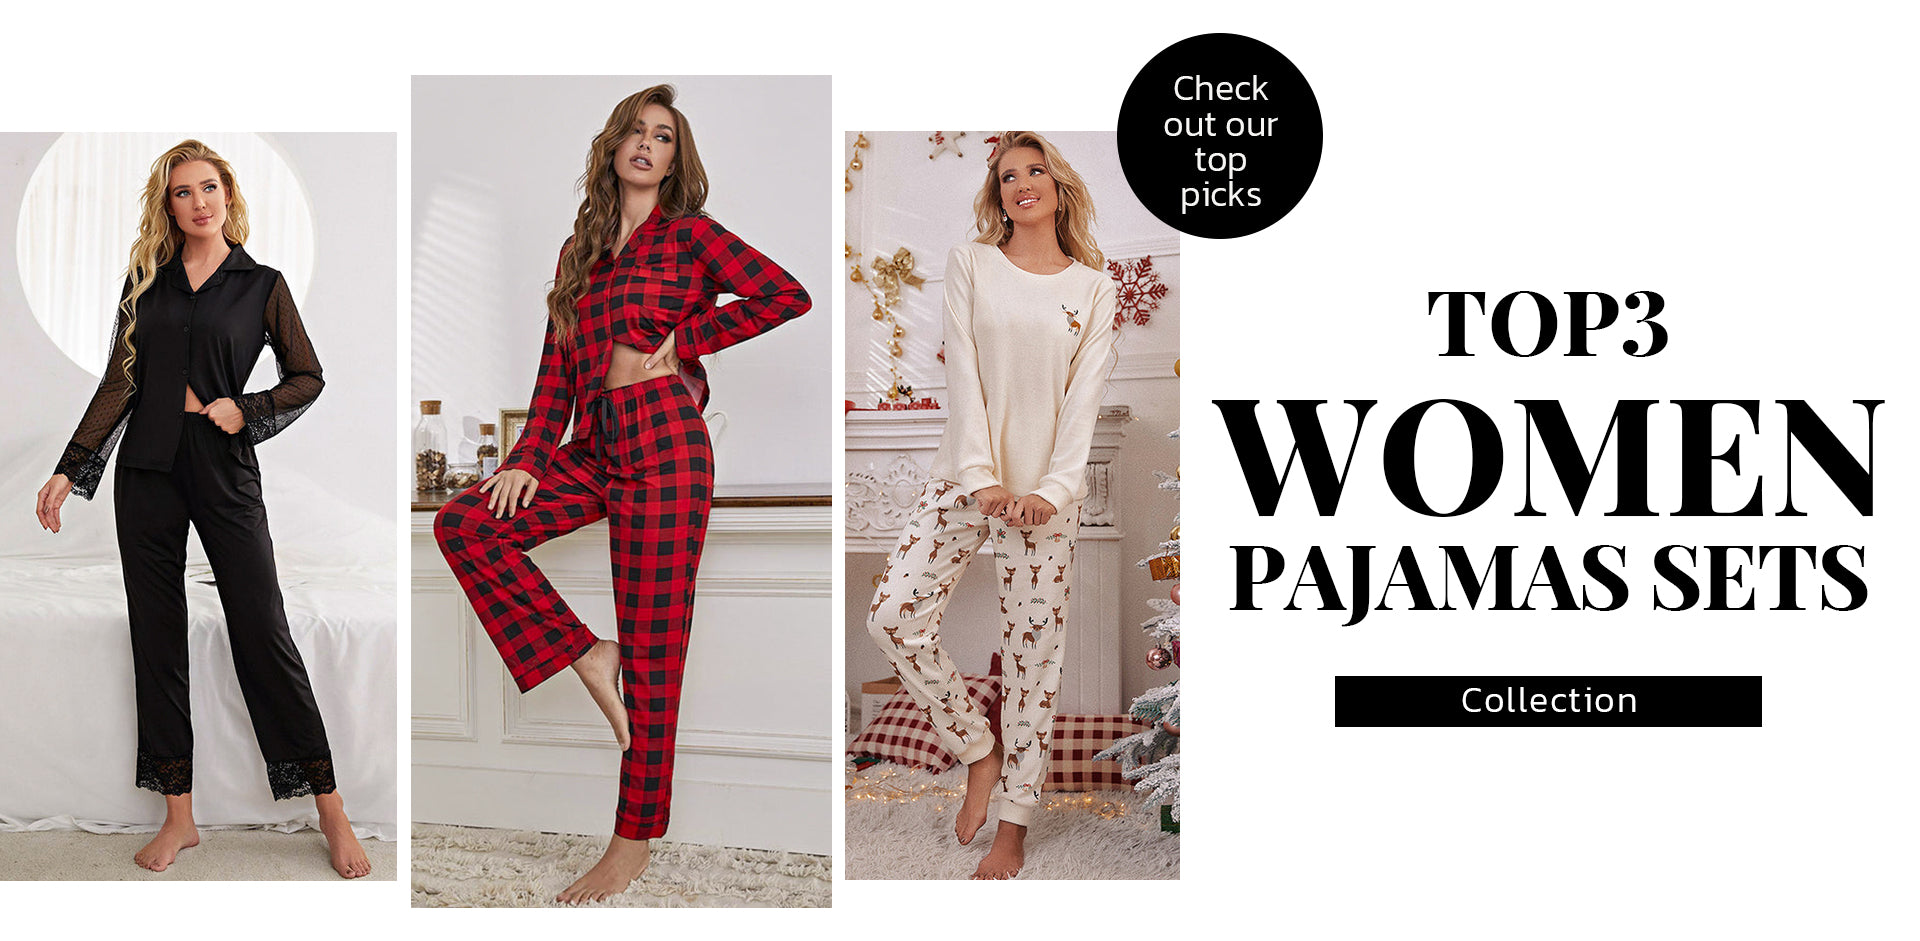 TOP 3 Women PAJAMAS SETS COLLECTION From Zeagoo